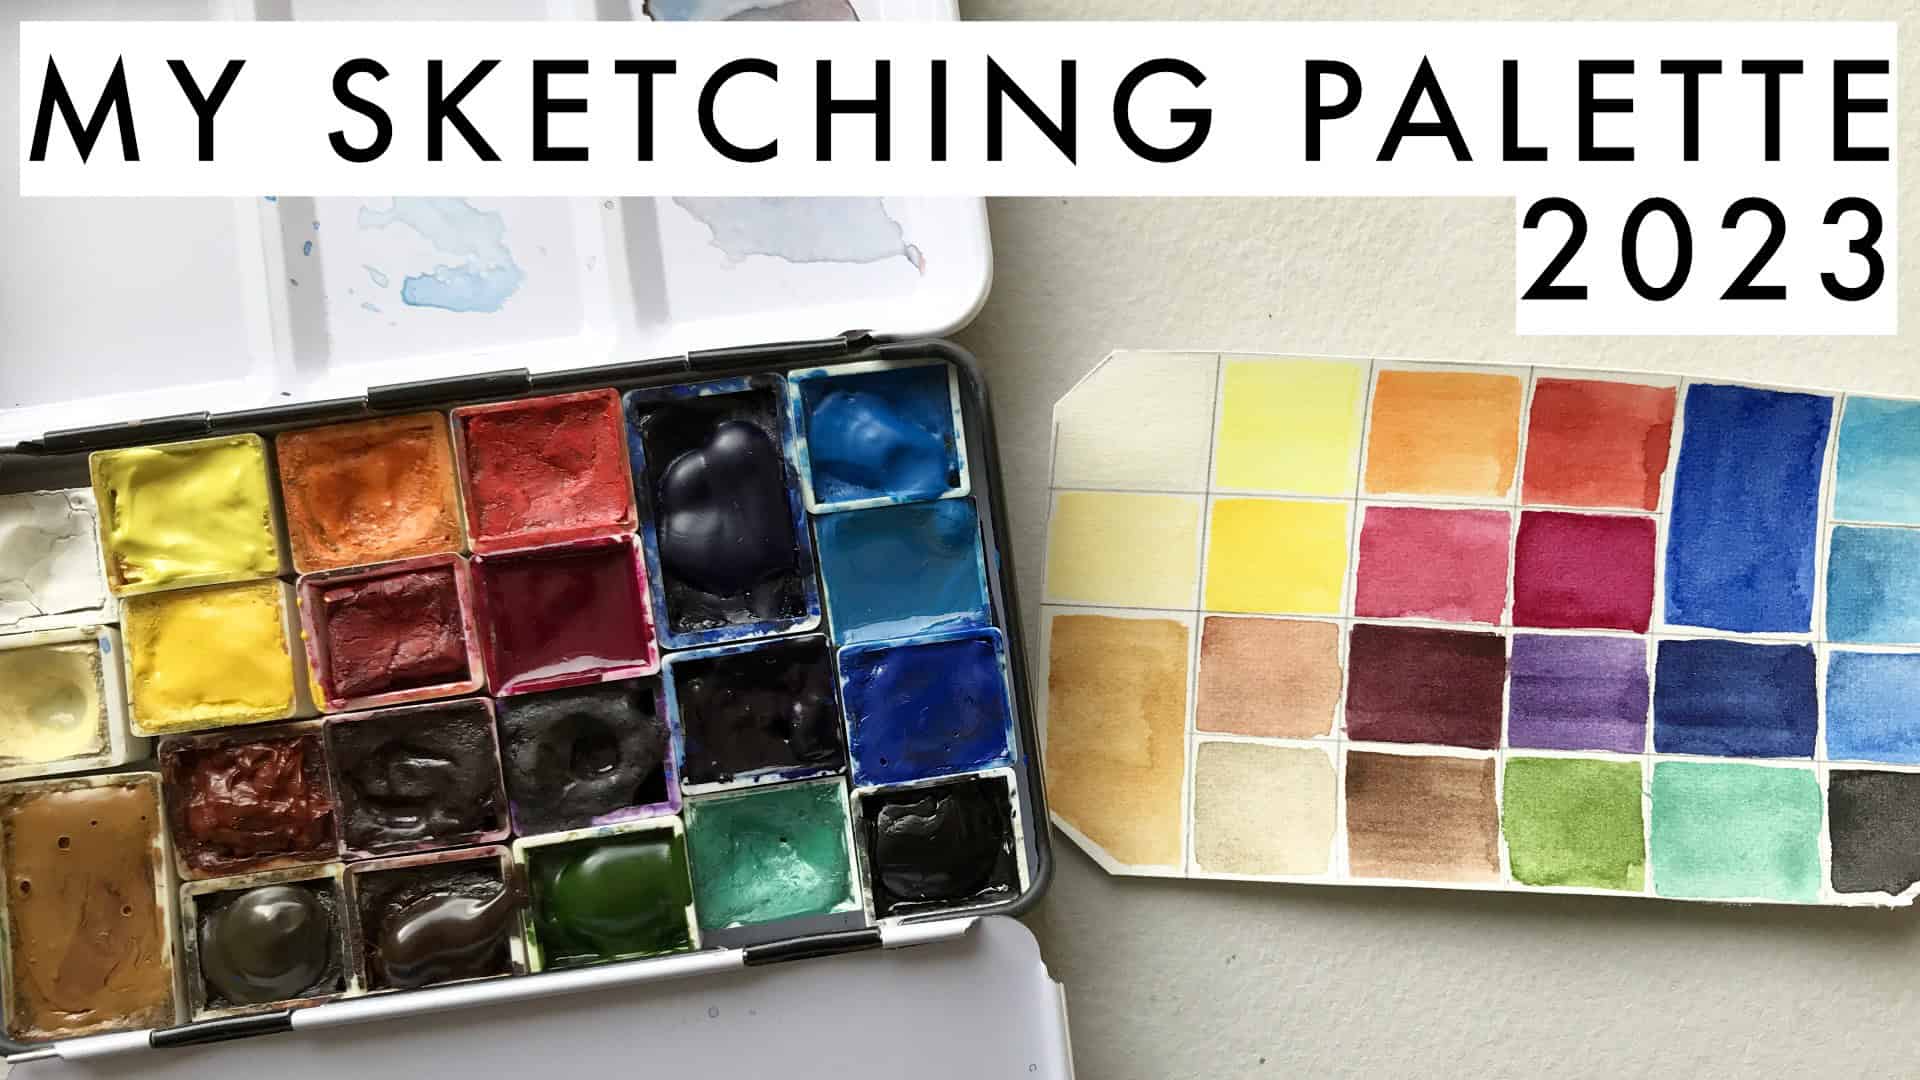 My current sketching palette - changes to my palette (March 2023)